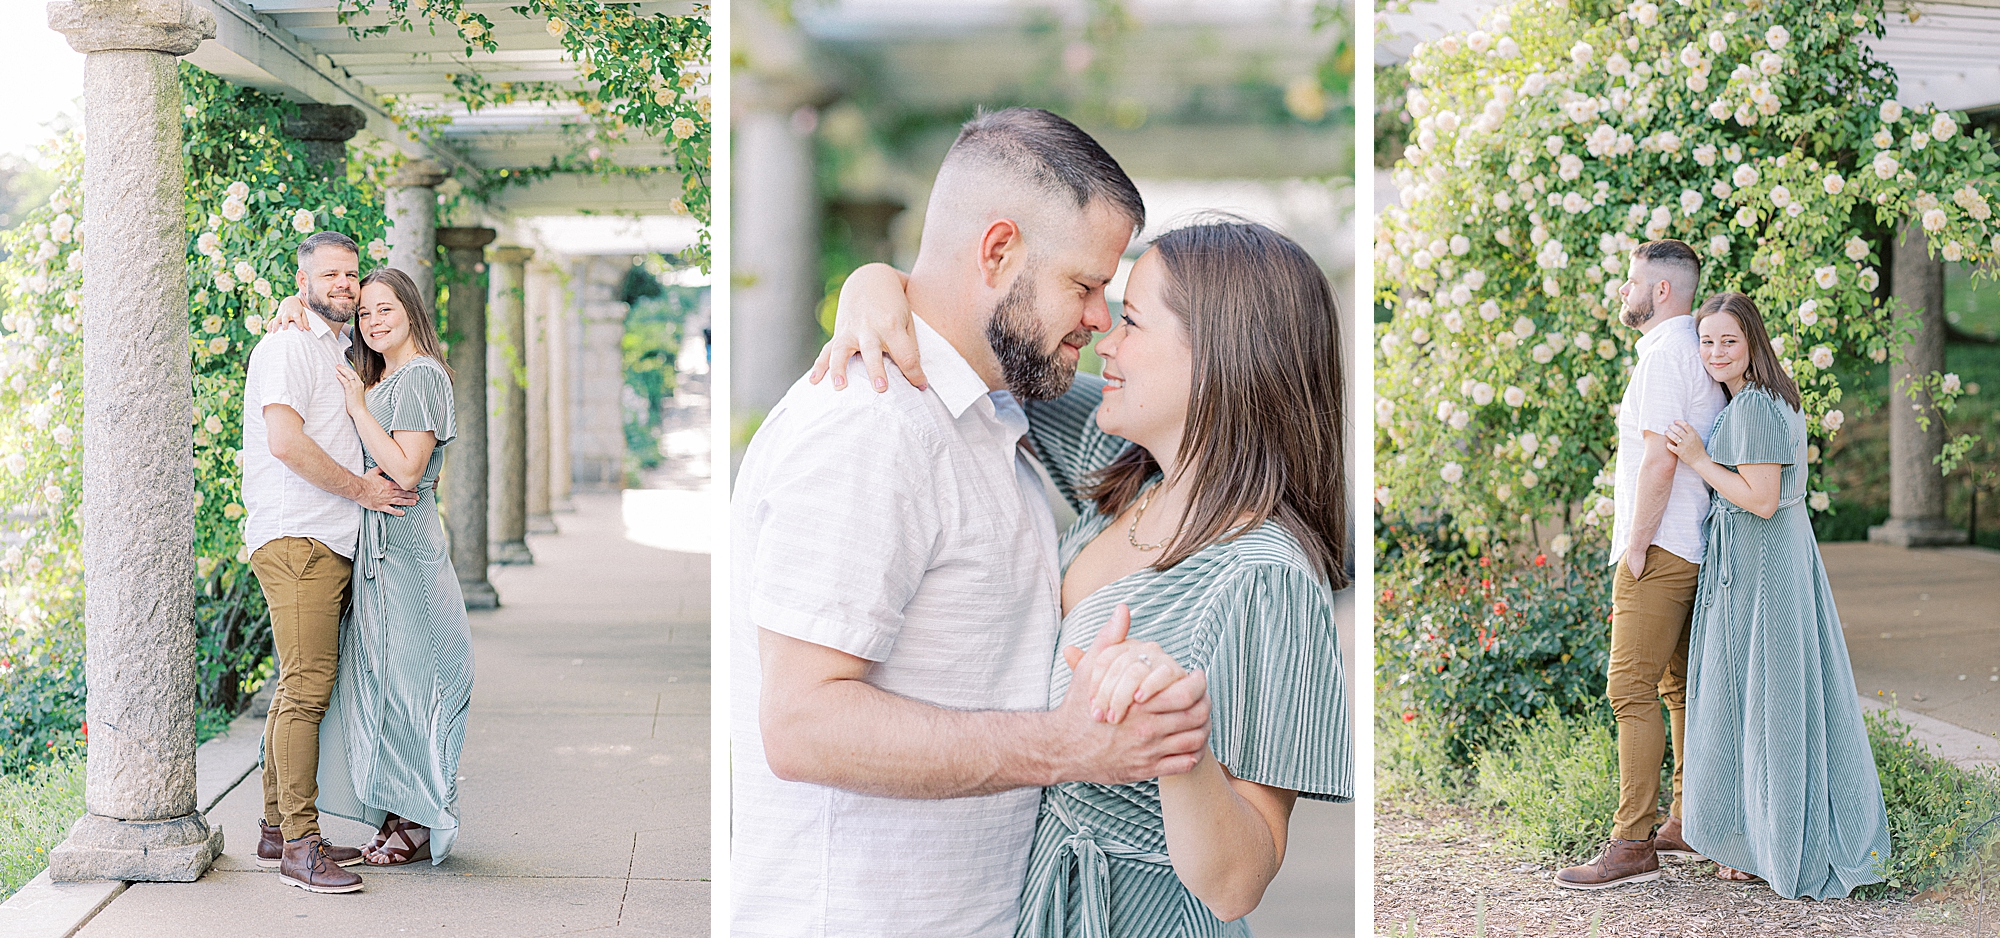 Richmond engagement session at Maymont Park by Ashley Eagleson Photography